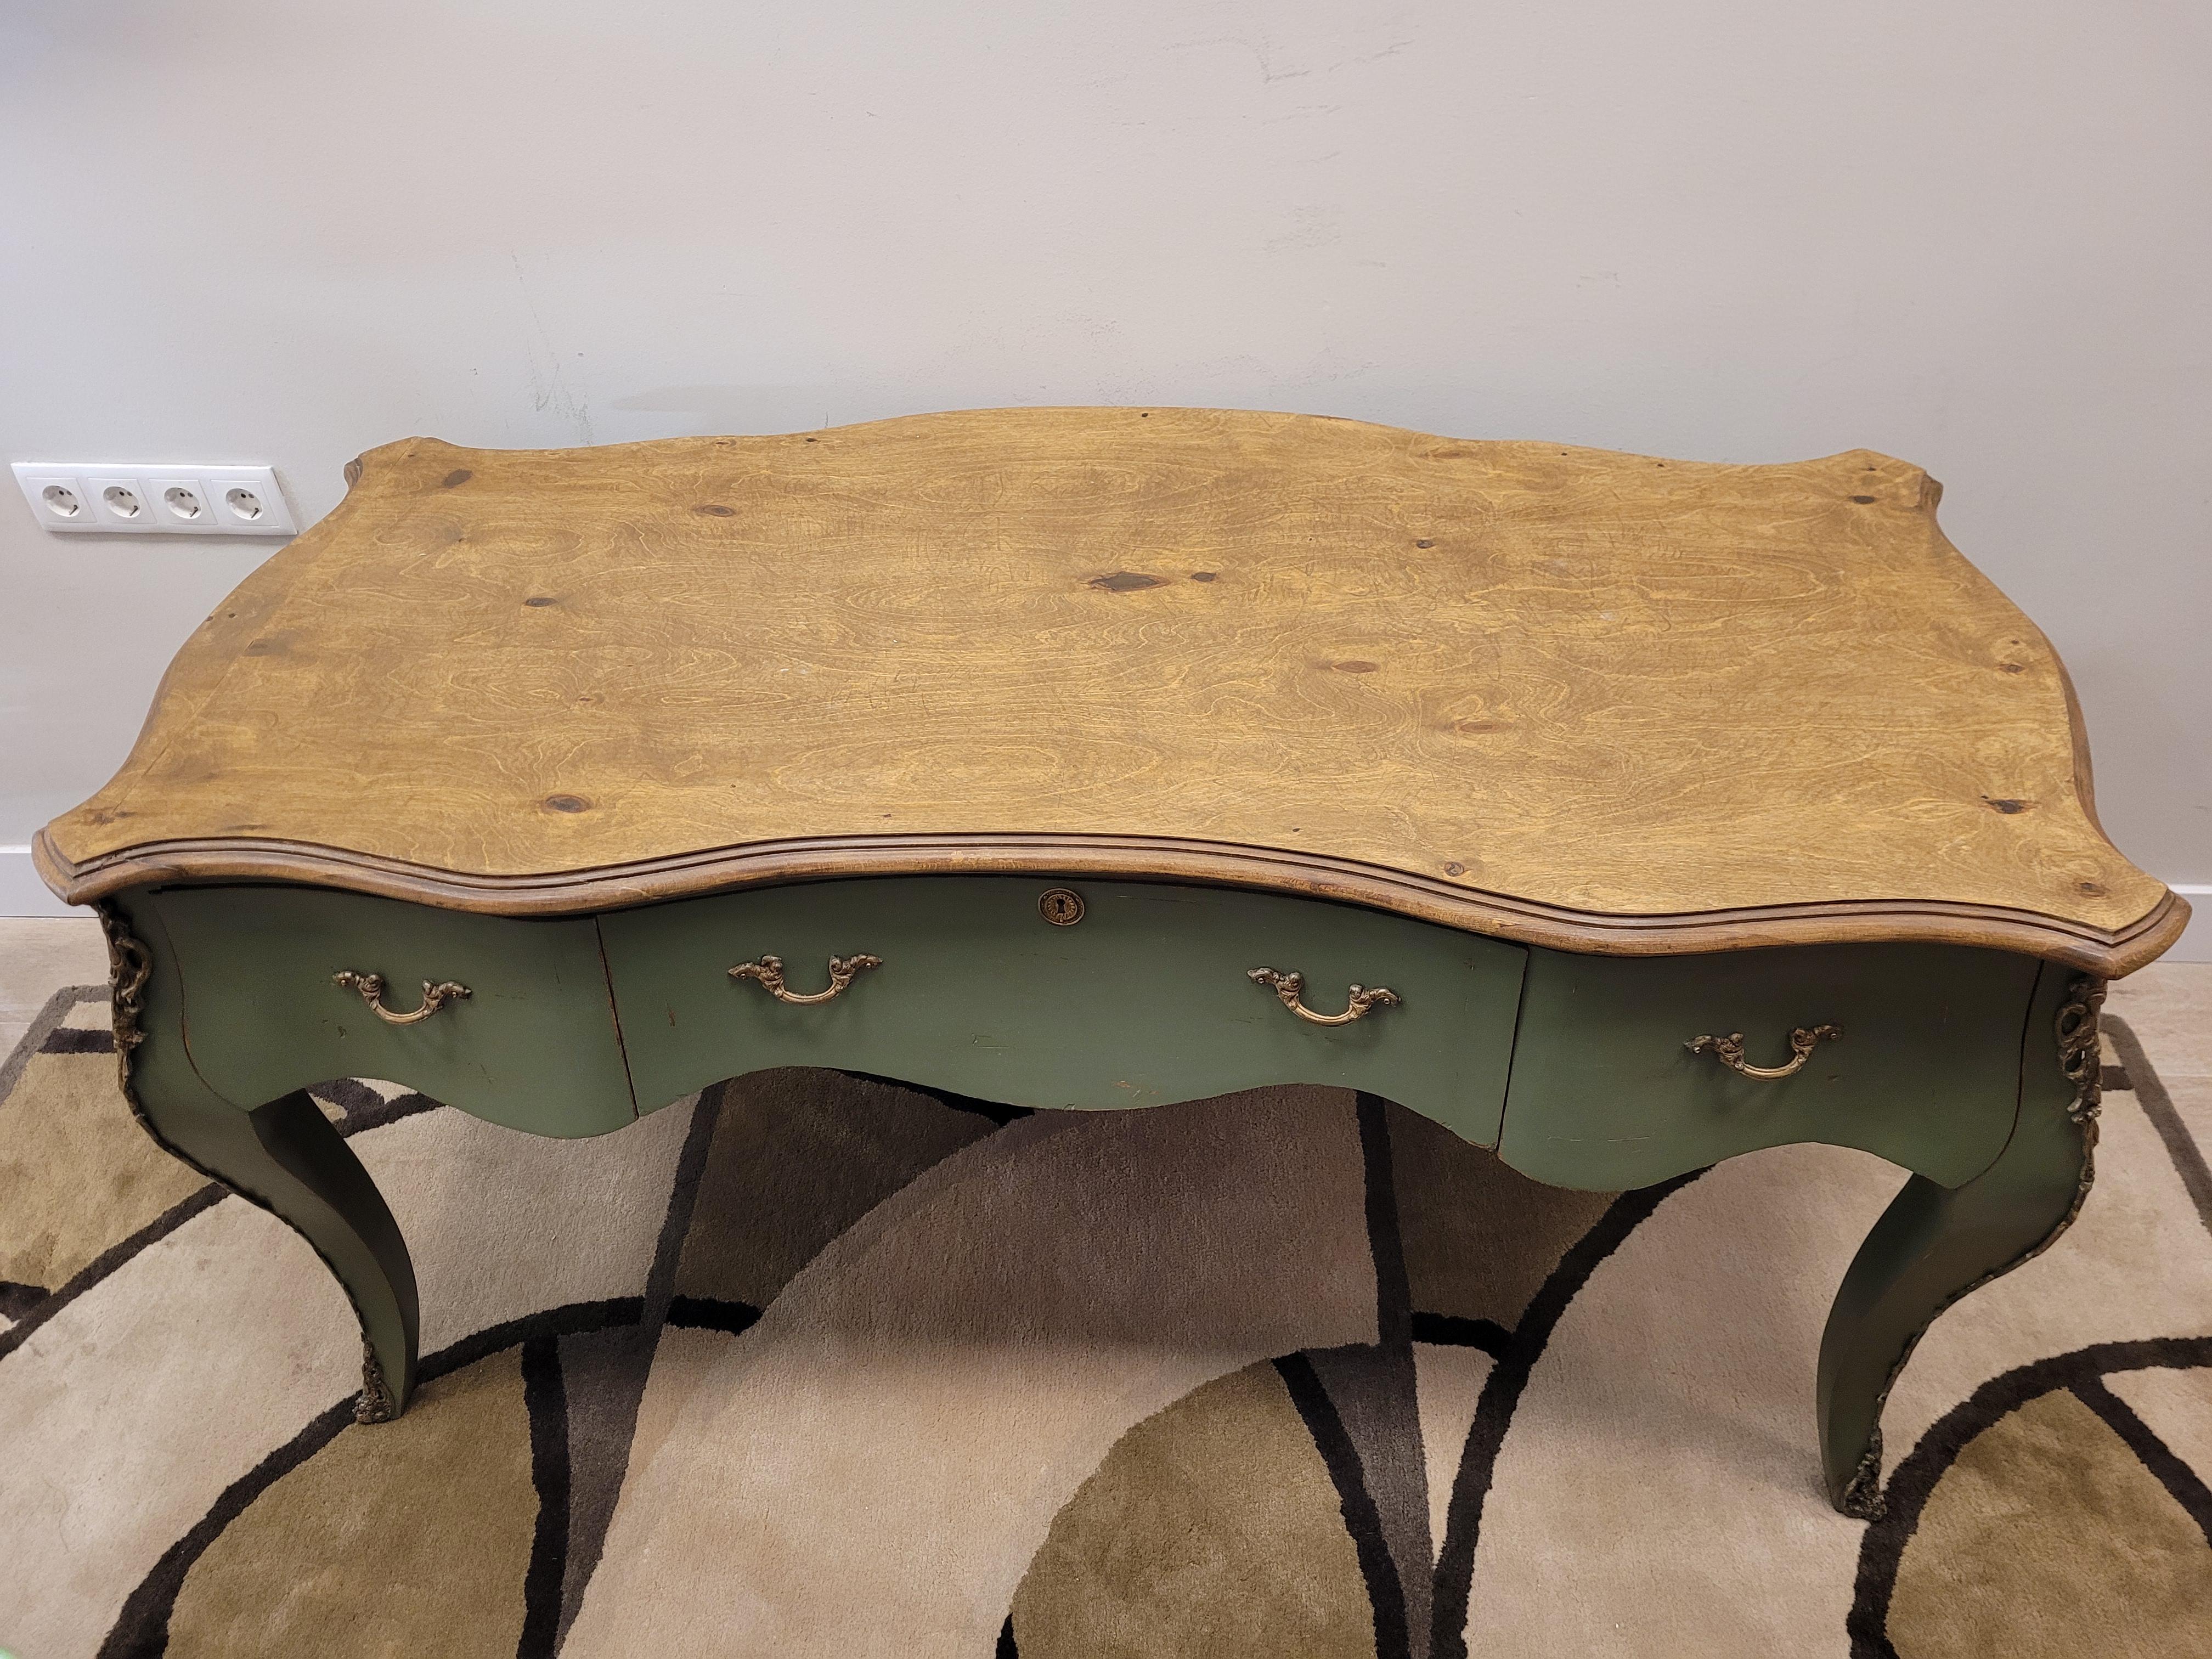 Provençal Green Center Console  table, polychrome, 50's - 60's - France For Sale 5